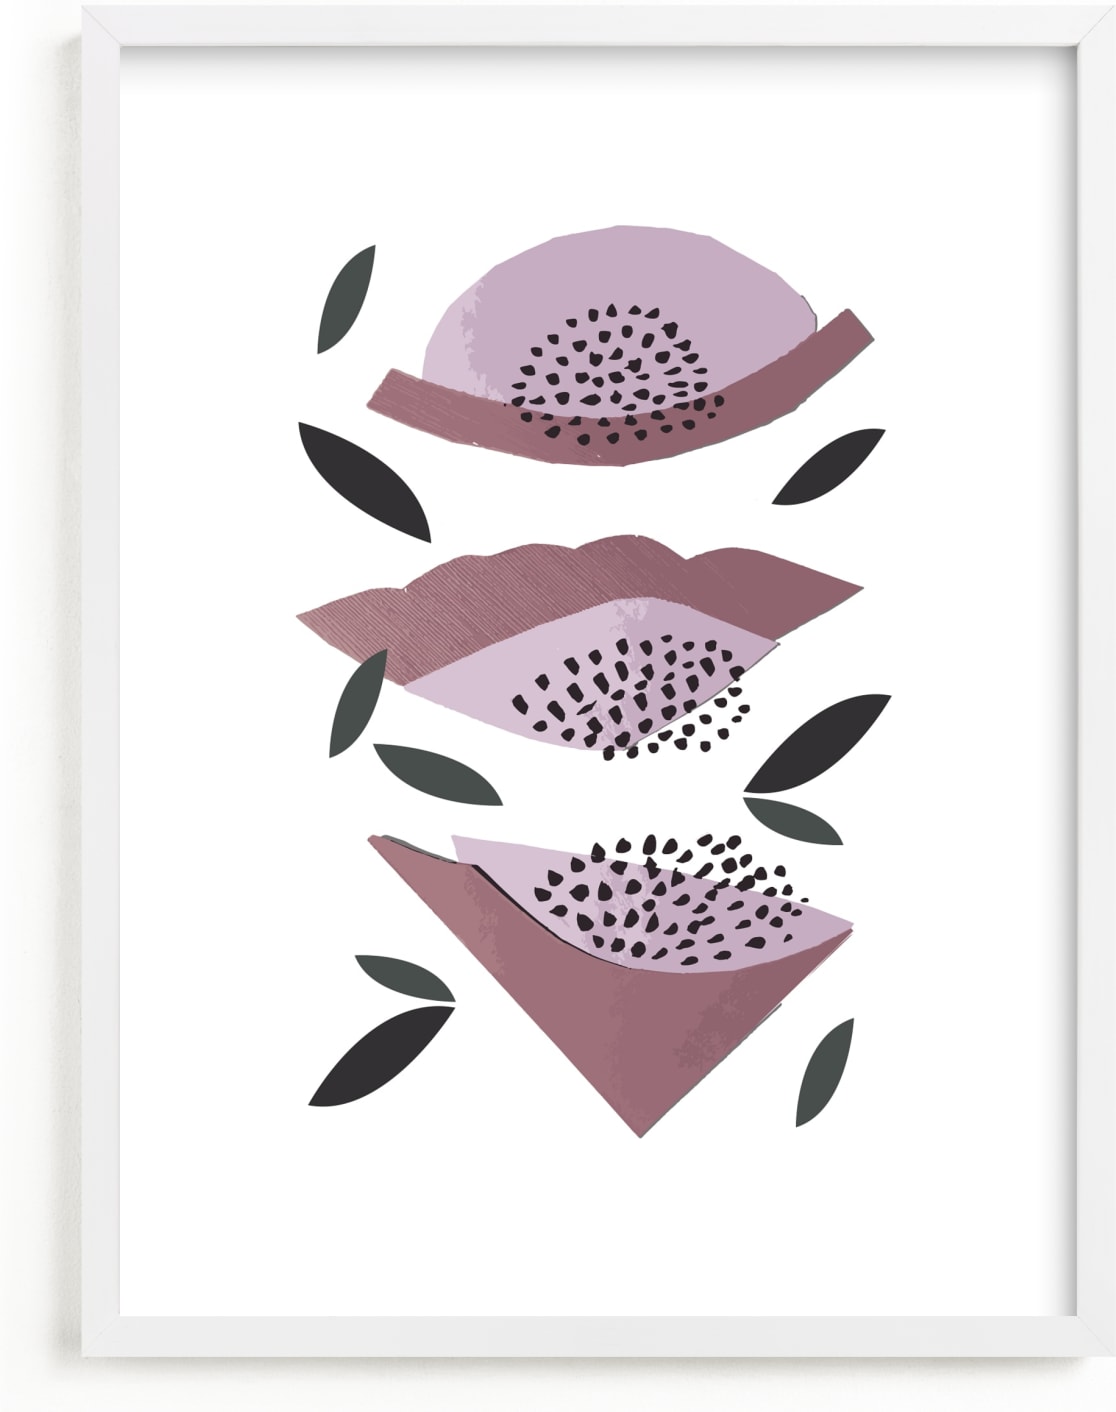 This is a non classic colors kids wall art by Jenna Skead called Honey Melon.